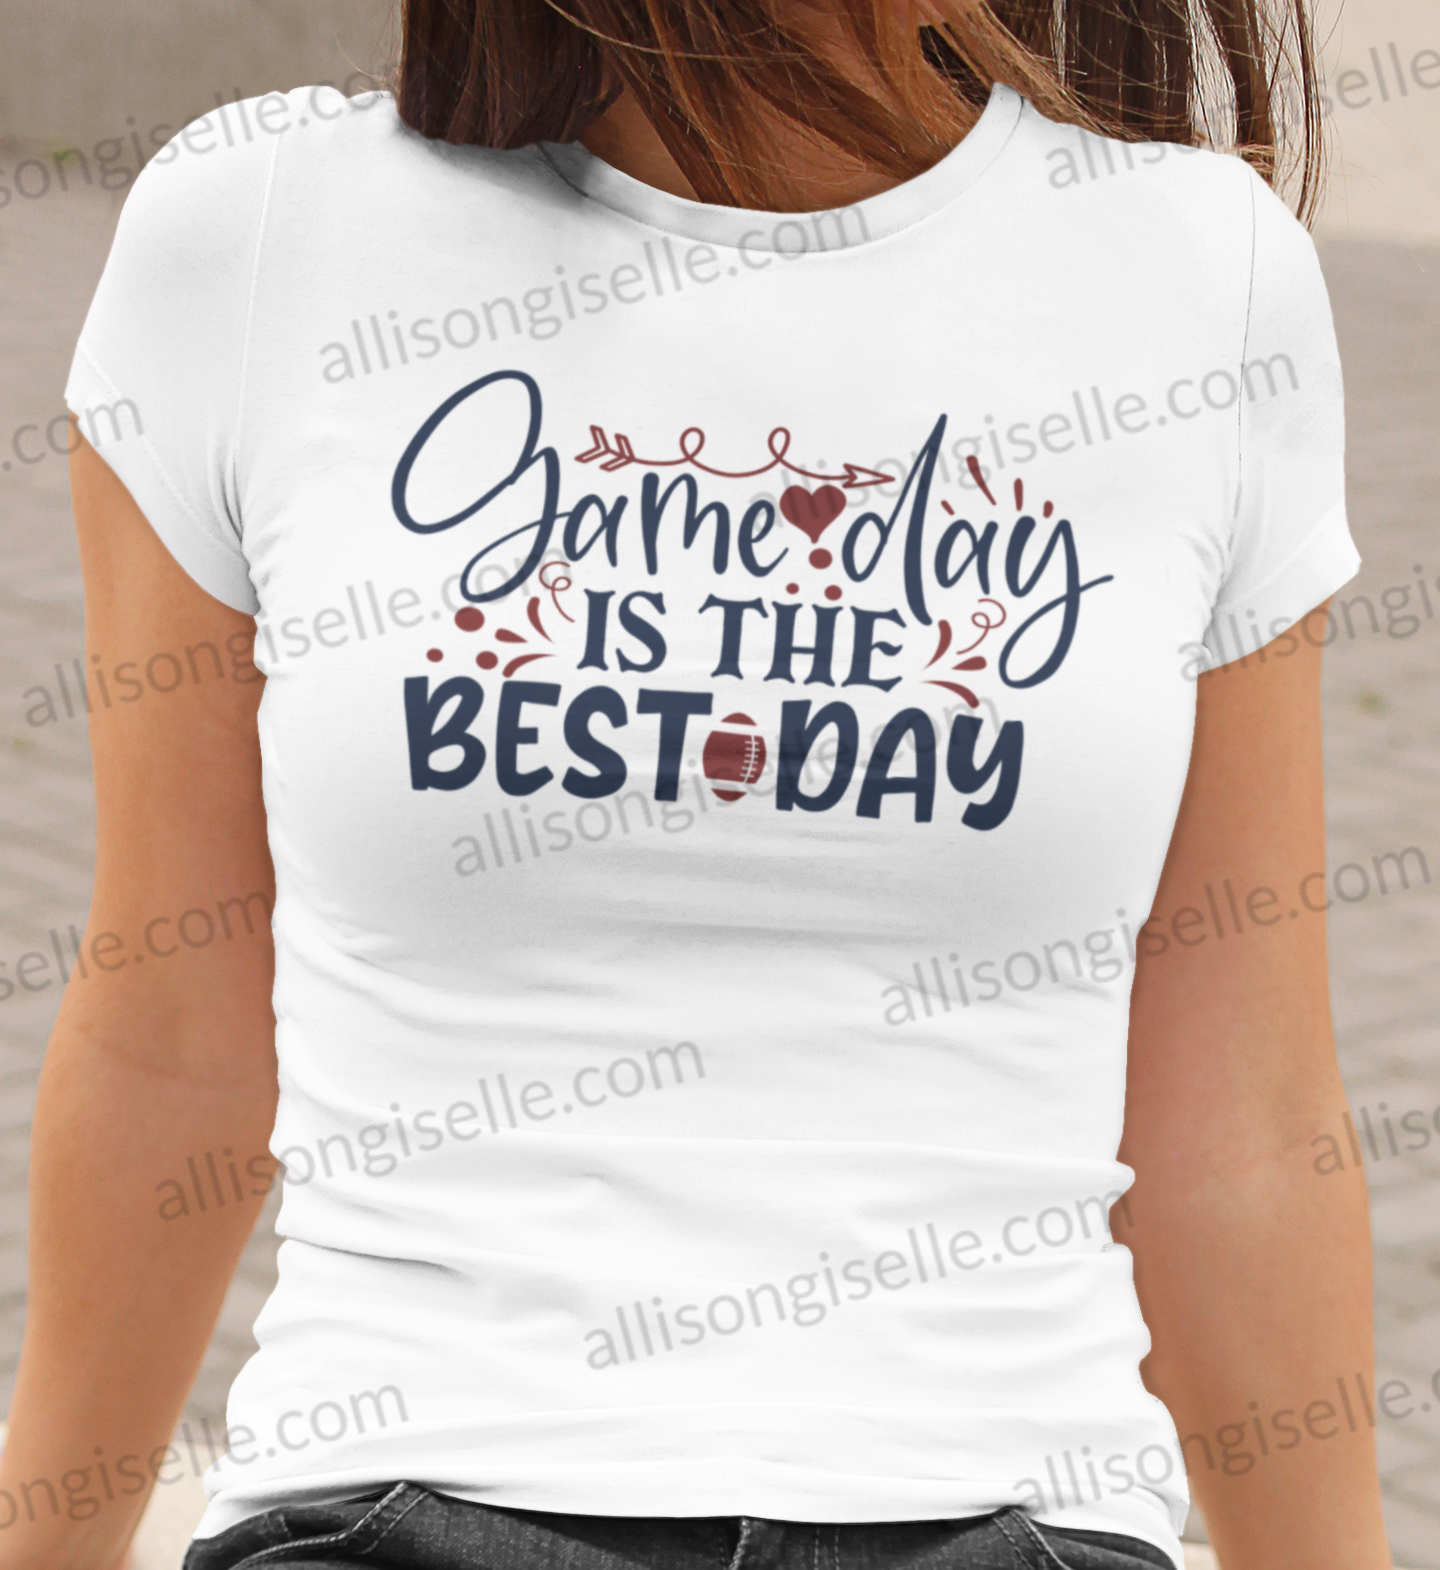 Game Day Is The Best Day Football Shirt, Football Shirt, Football Shirt Women, Crew Neck Women Shirt, Football t shirt, Football t shirt Women